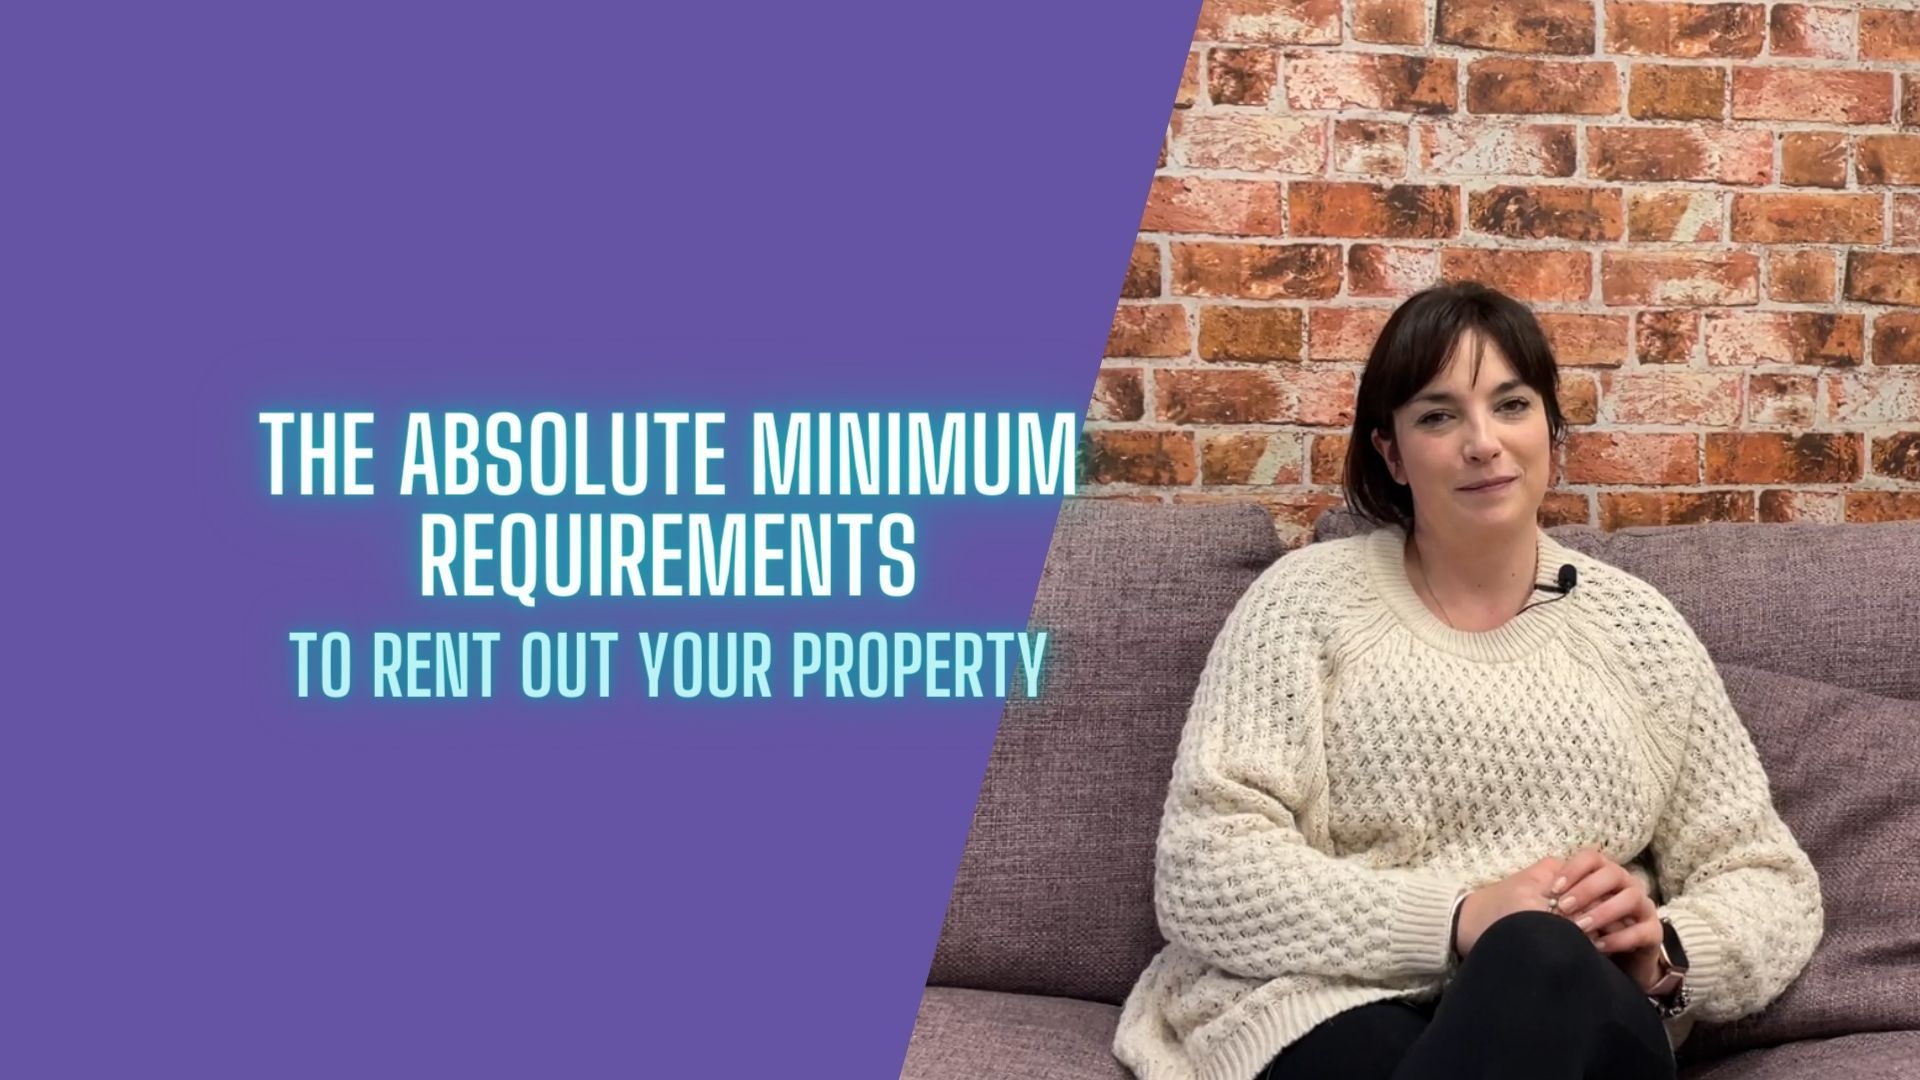 VIDEO: The Absolute MINIMUM Requirements To Rent Out Your Property